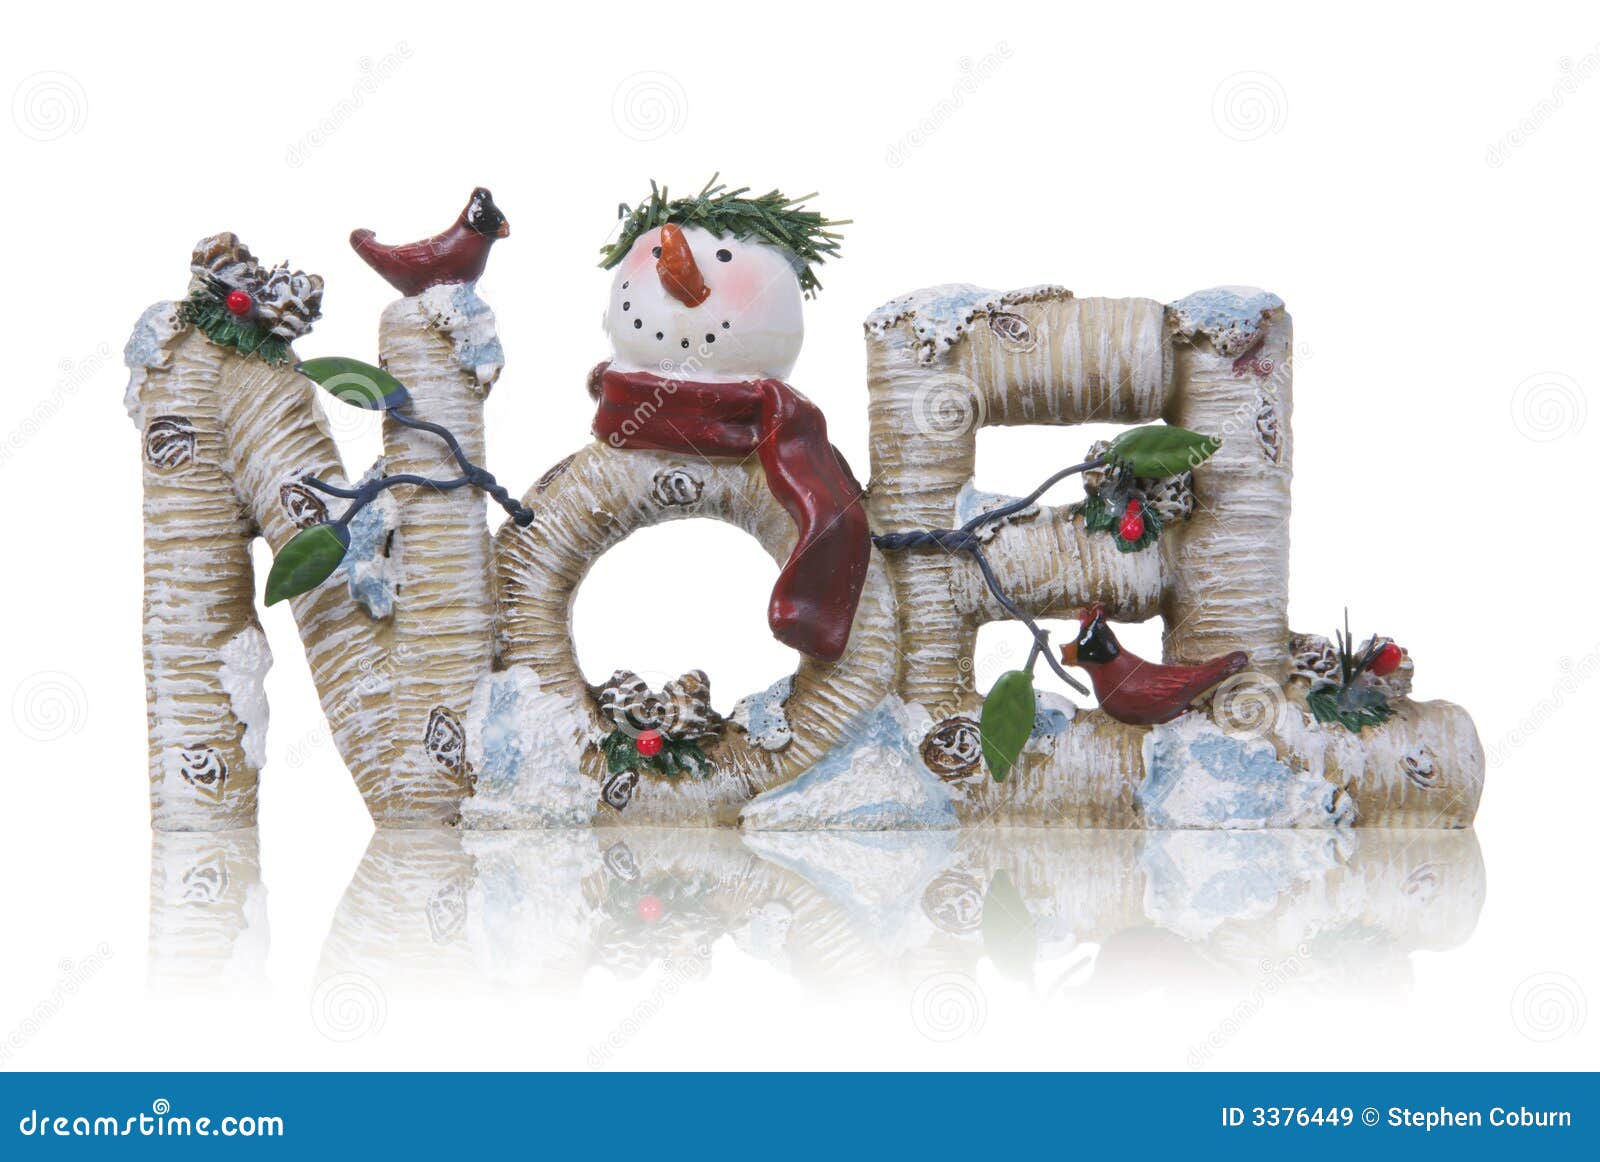 Noel Christmas Sign Royalty Free Stock Images - Image: 3376449